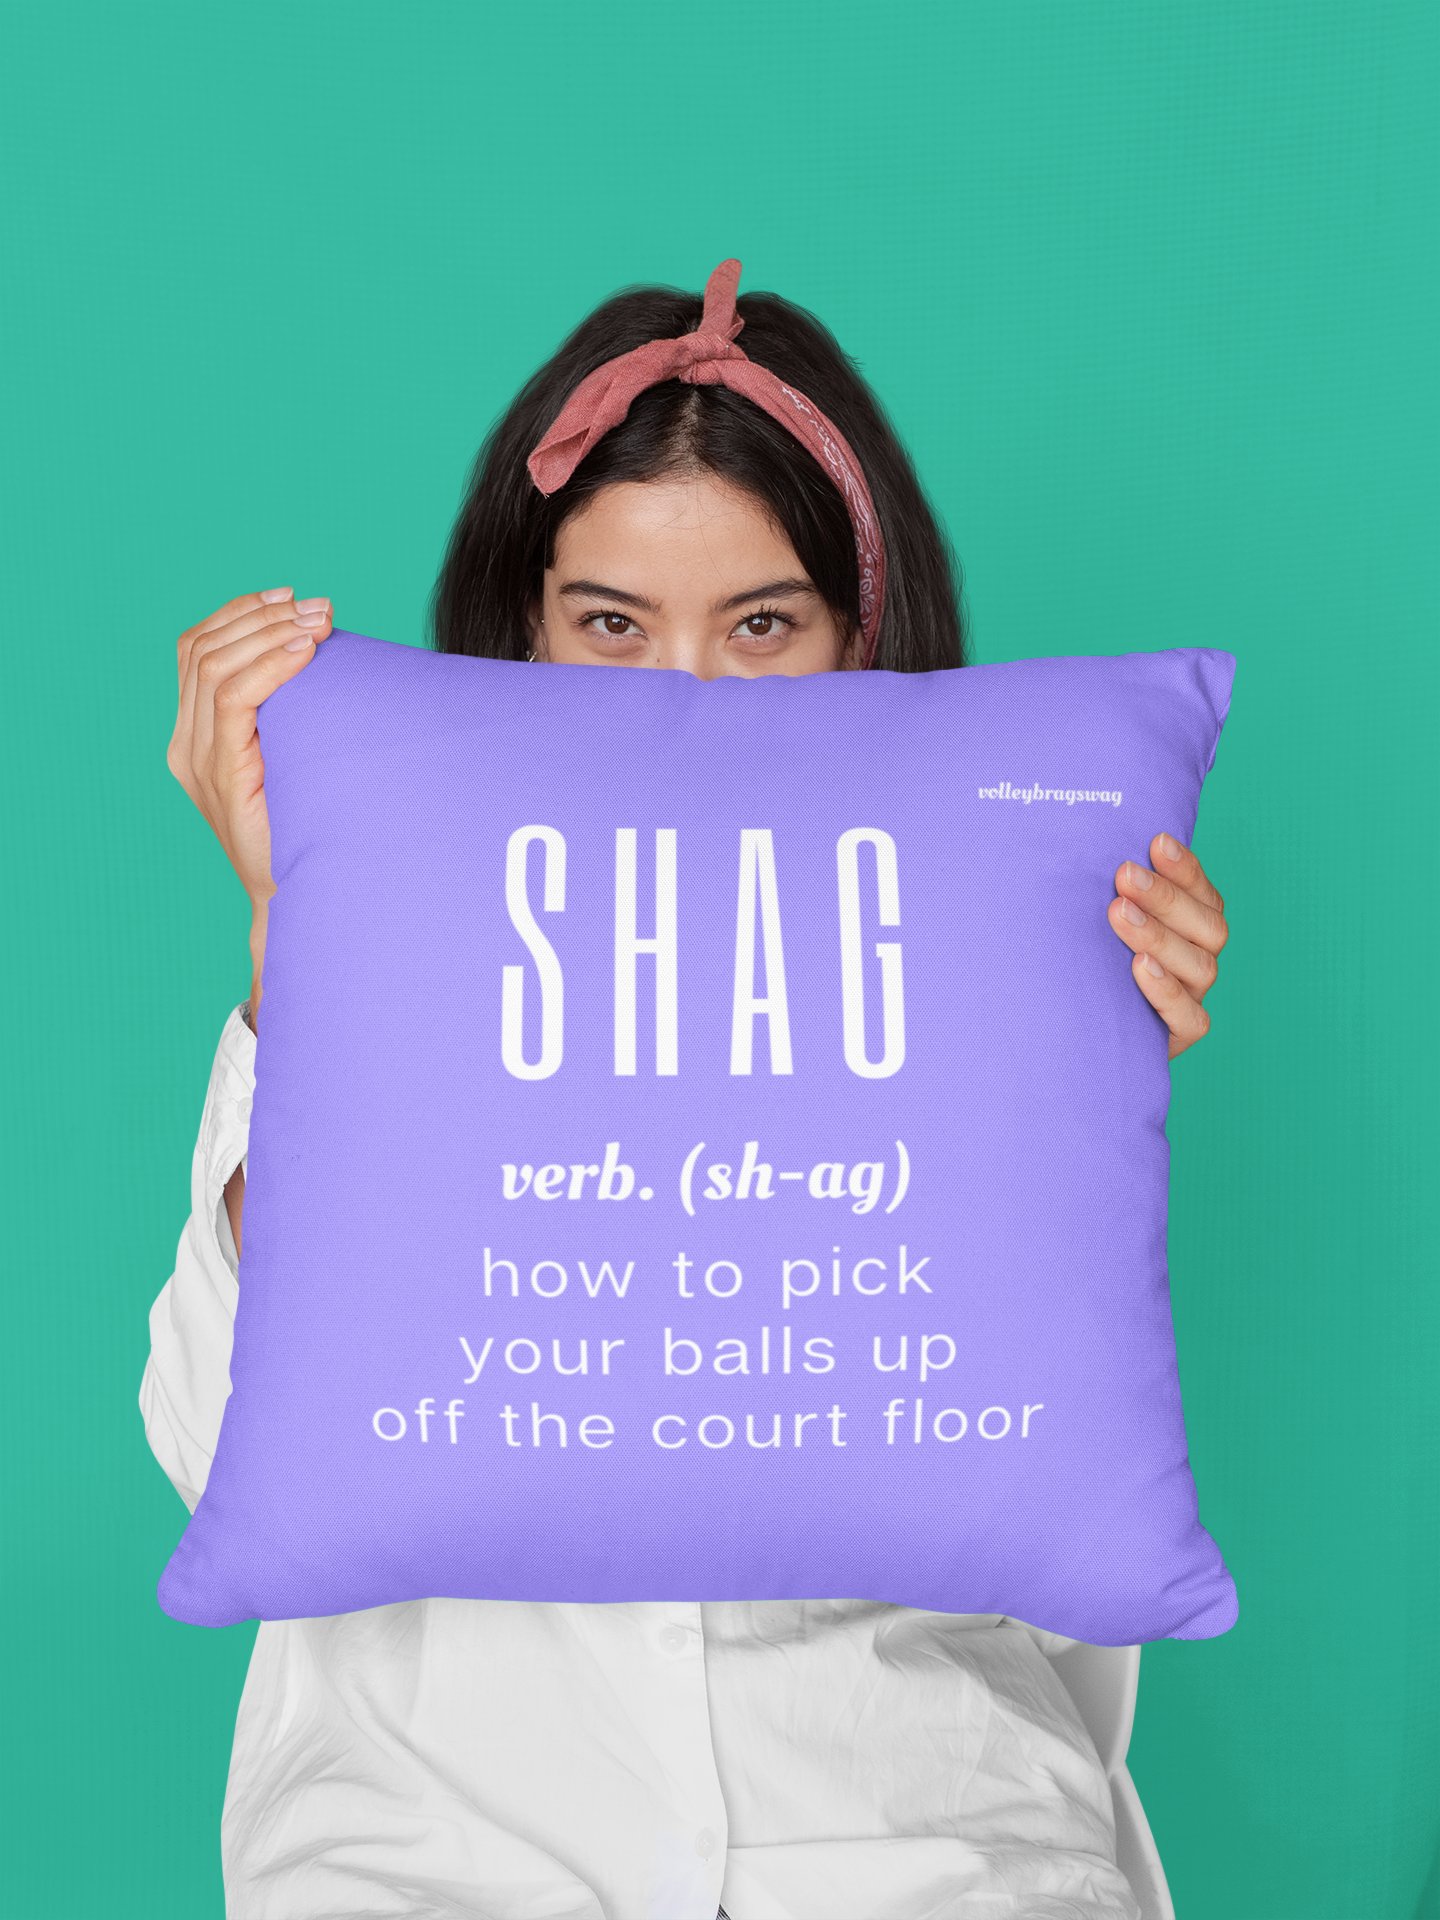 April Chapple, Elite Volleyball Coach, Launches a Hilarious Volleyball Pillow Line With Fun Tongue-in-Cheek Designs sure to make players and enthusiasts laugh.